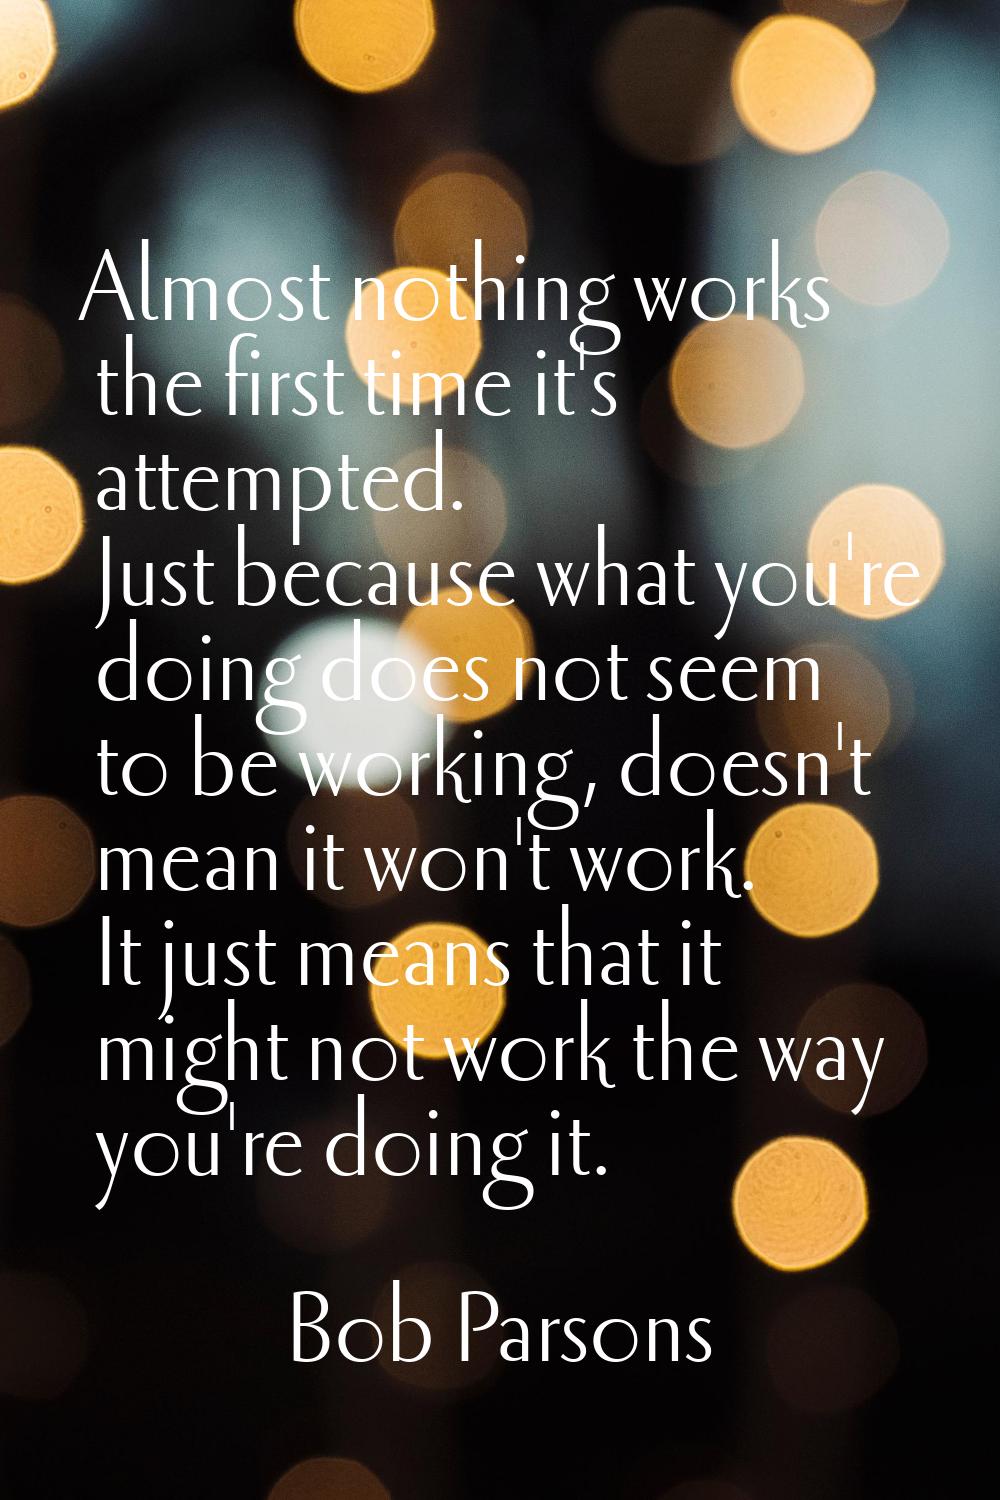 Almost nothing works the first time it's attempted. Just because what you're doing does not seem to